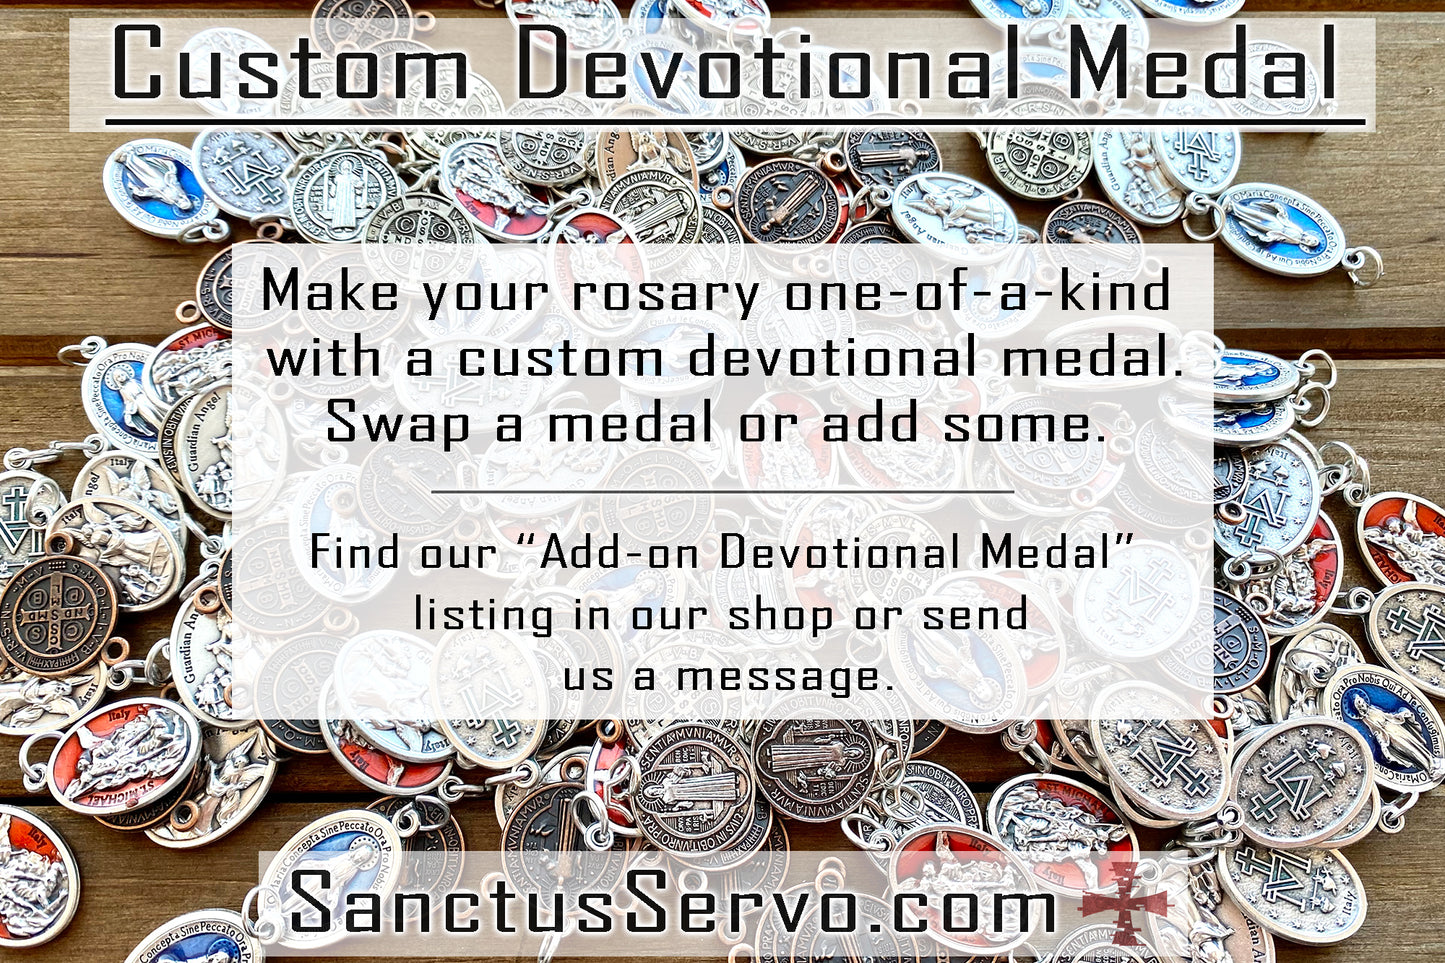 Enhance your Catholic prayer experience with an add-on devotional medal from Sanctus Servo. Choose from over 60 saint medals to deepen your faith, personalize your rosary, and make a powerful statement of your unwavering devotion.